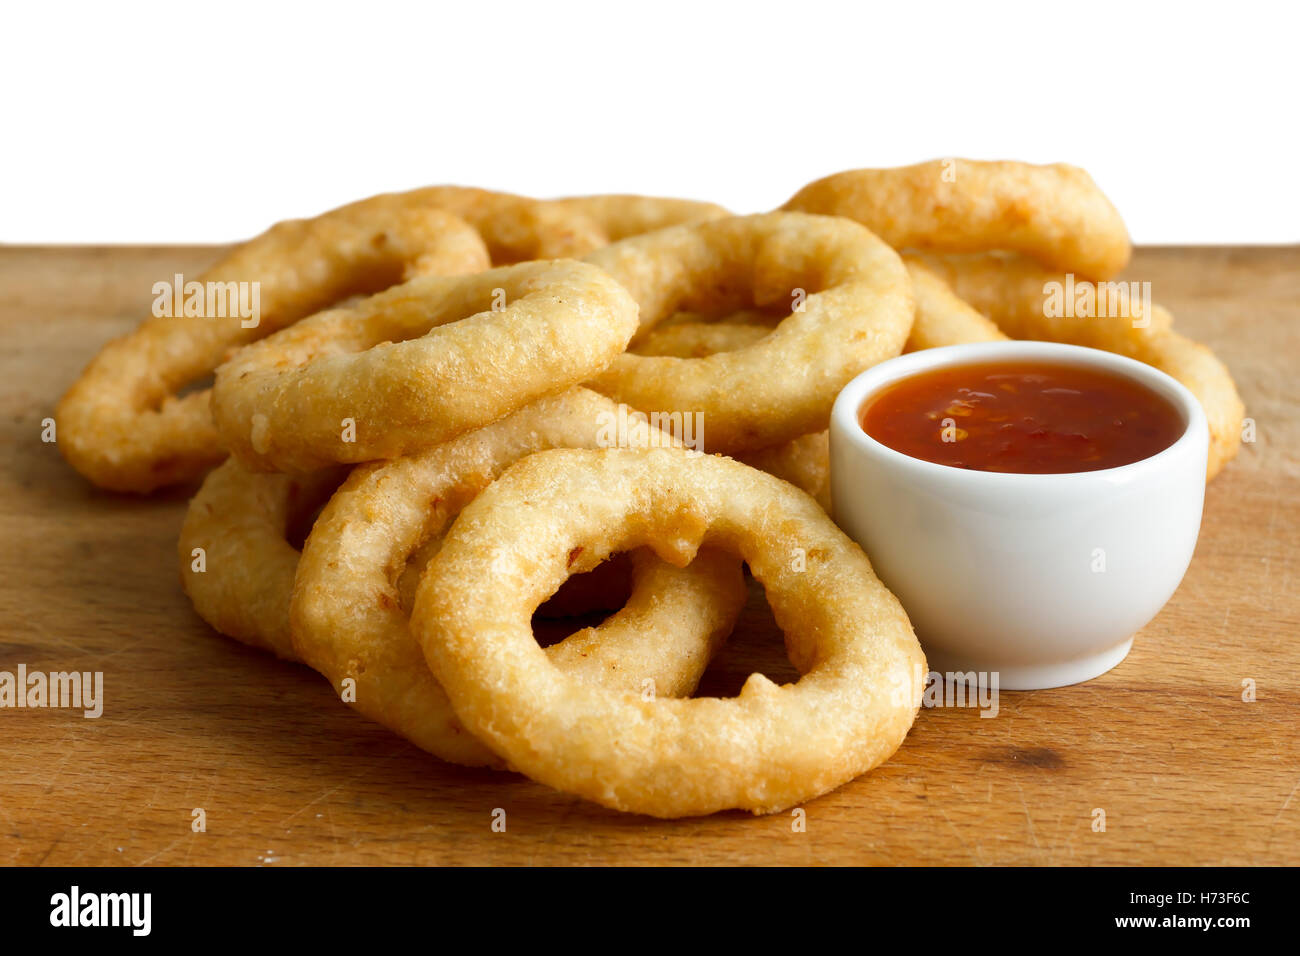 Heap of deep fried onion or calamari rings with chilli dip on wood board. Stock Photo